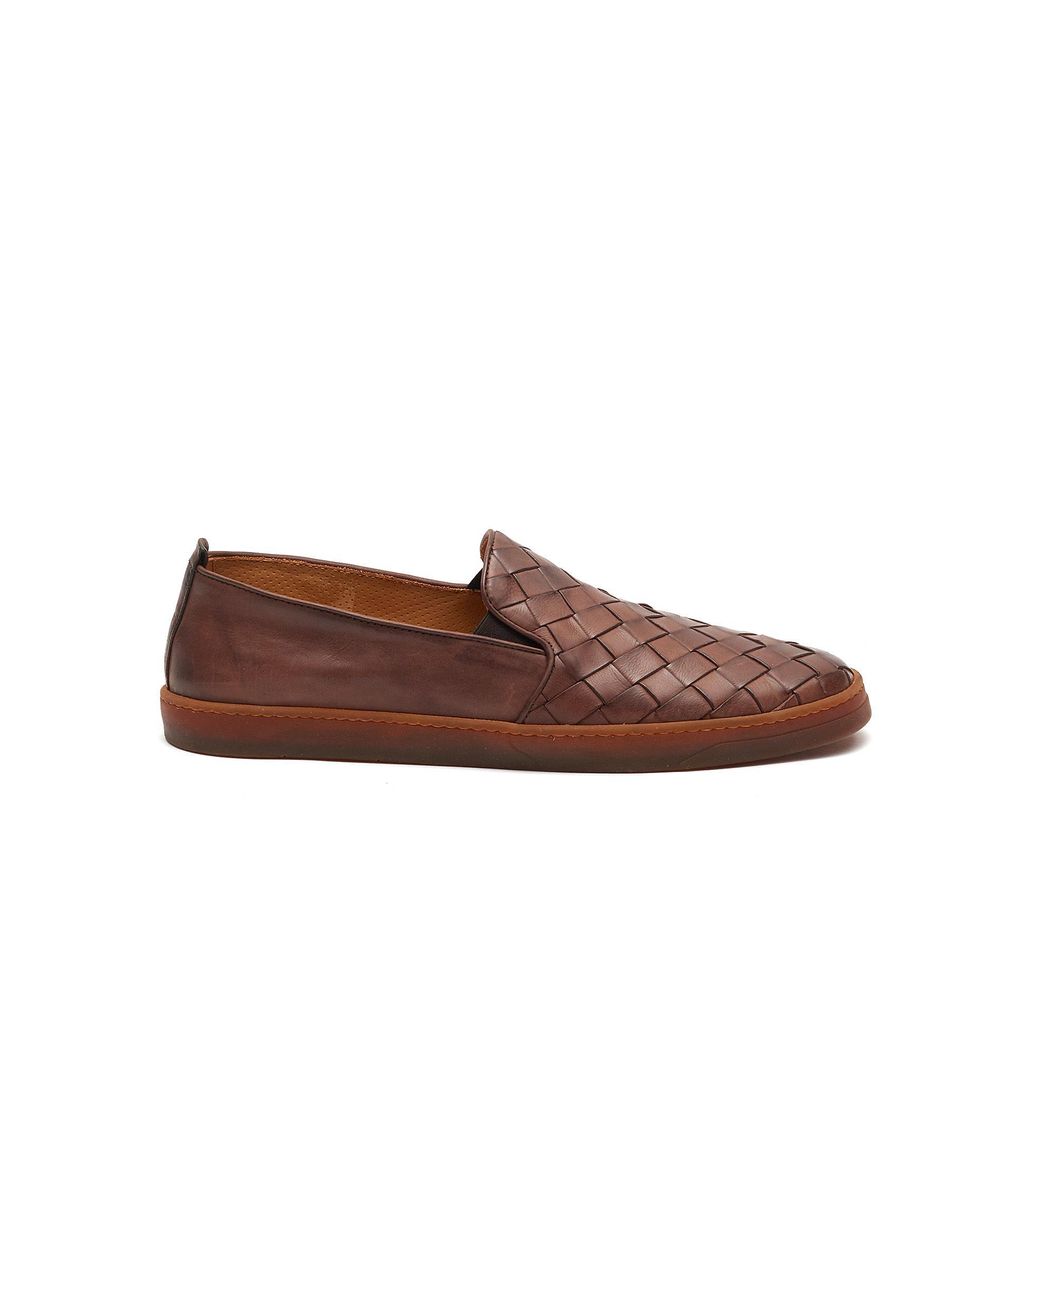 Henderson 'antiparos' Woven Leather Slip-ons Men Shoes Loafers ...